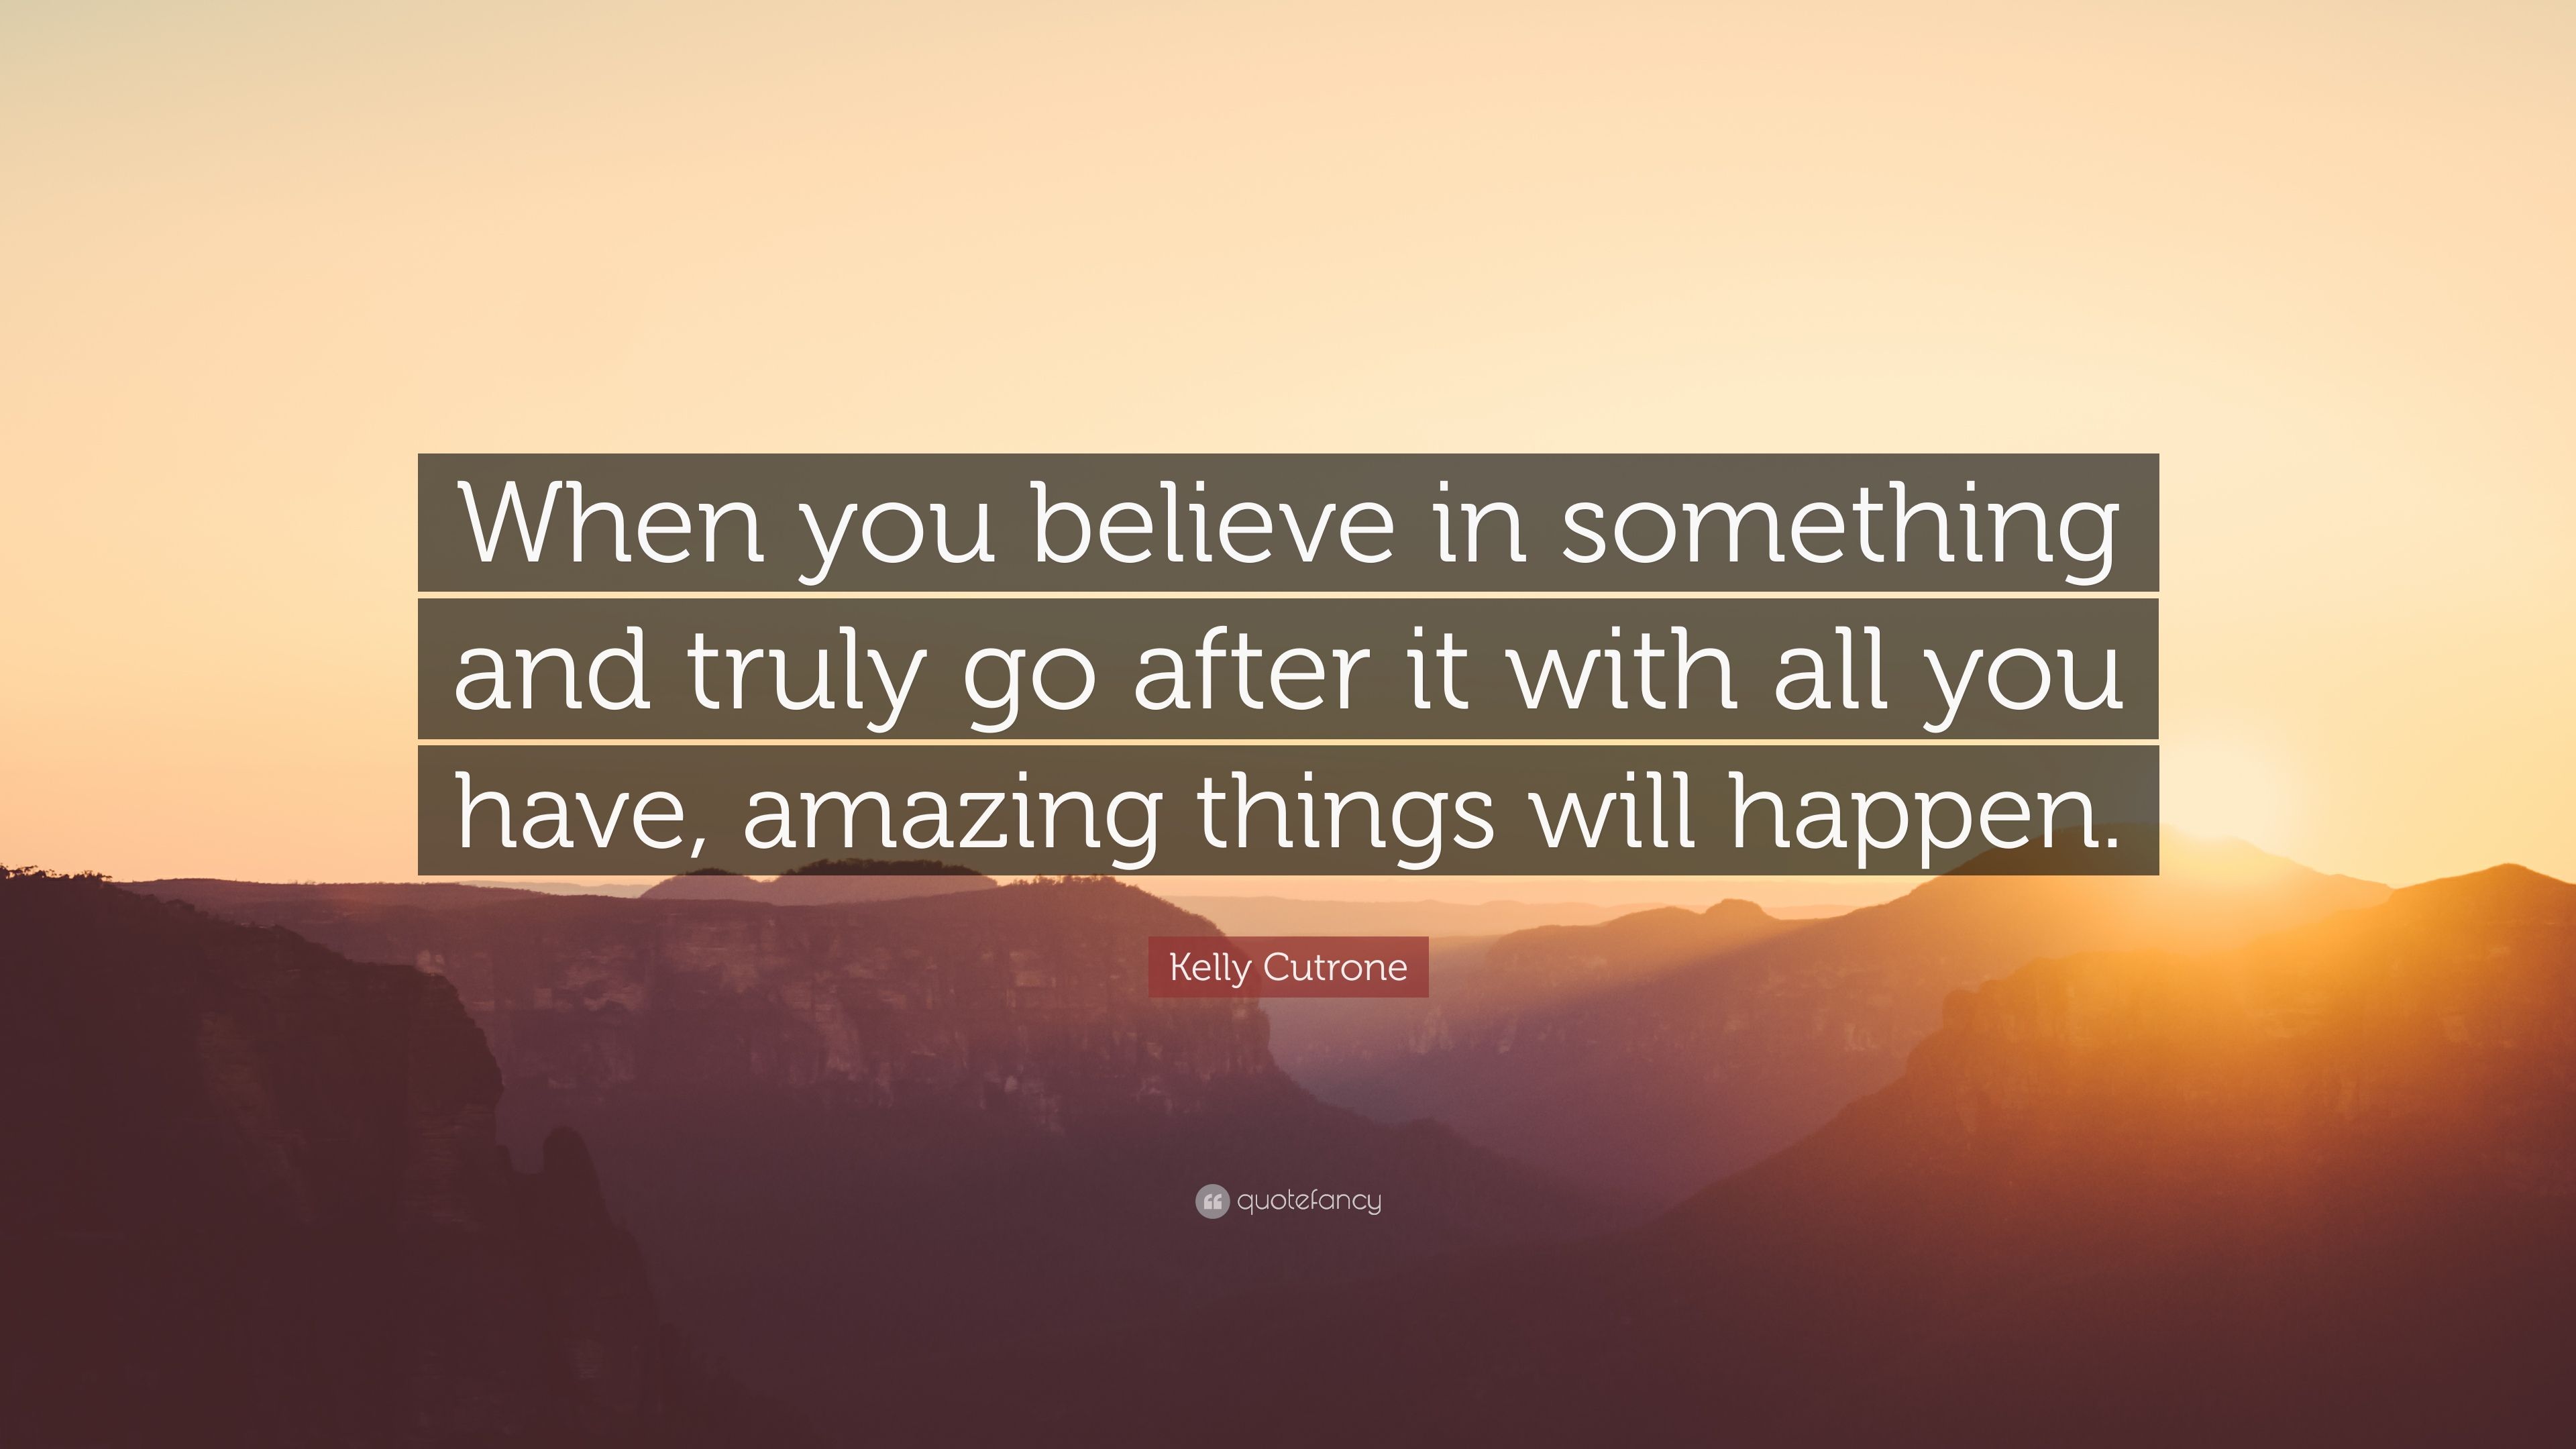 Kelly Cutrone Quote: “When you believe in something and truly go after it with all you have, amazing things will happen.” (7 wallpaper)